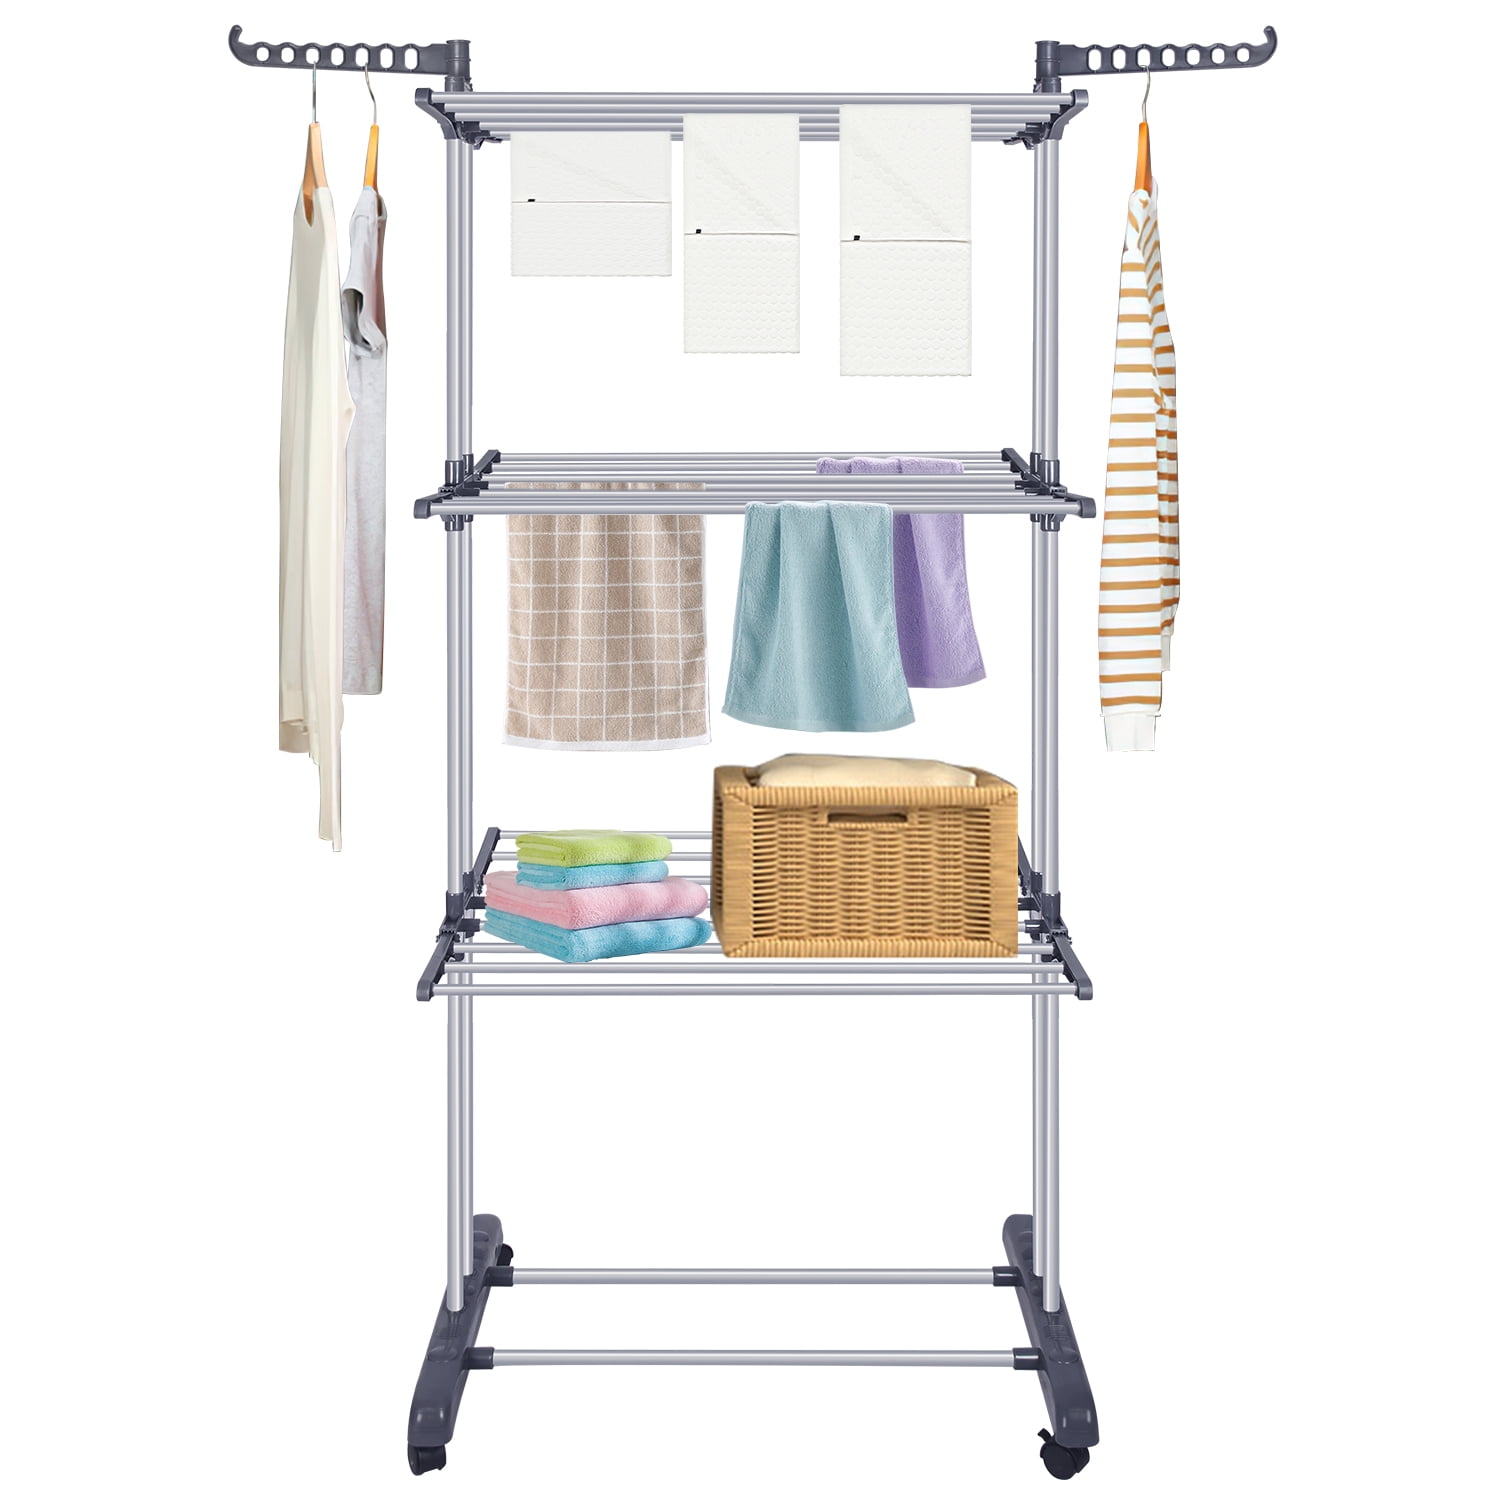 Folding Dryer 3-Tier Clothes Airer Laundry Storage Expanding Indoor Grey Rack UK 